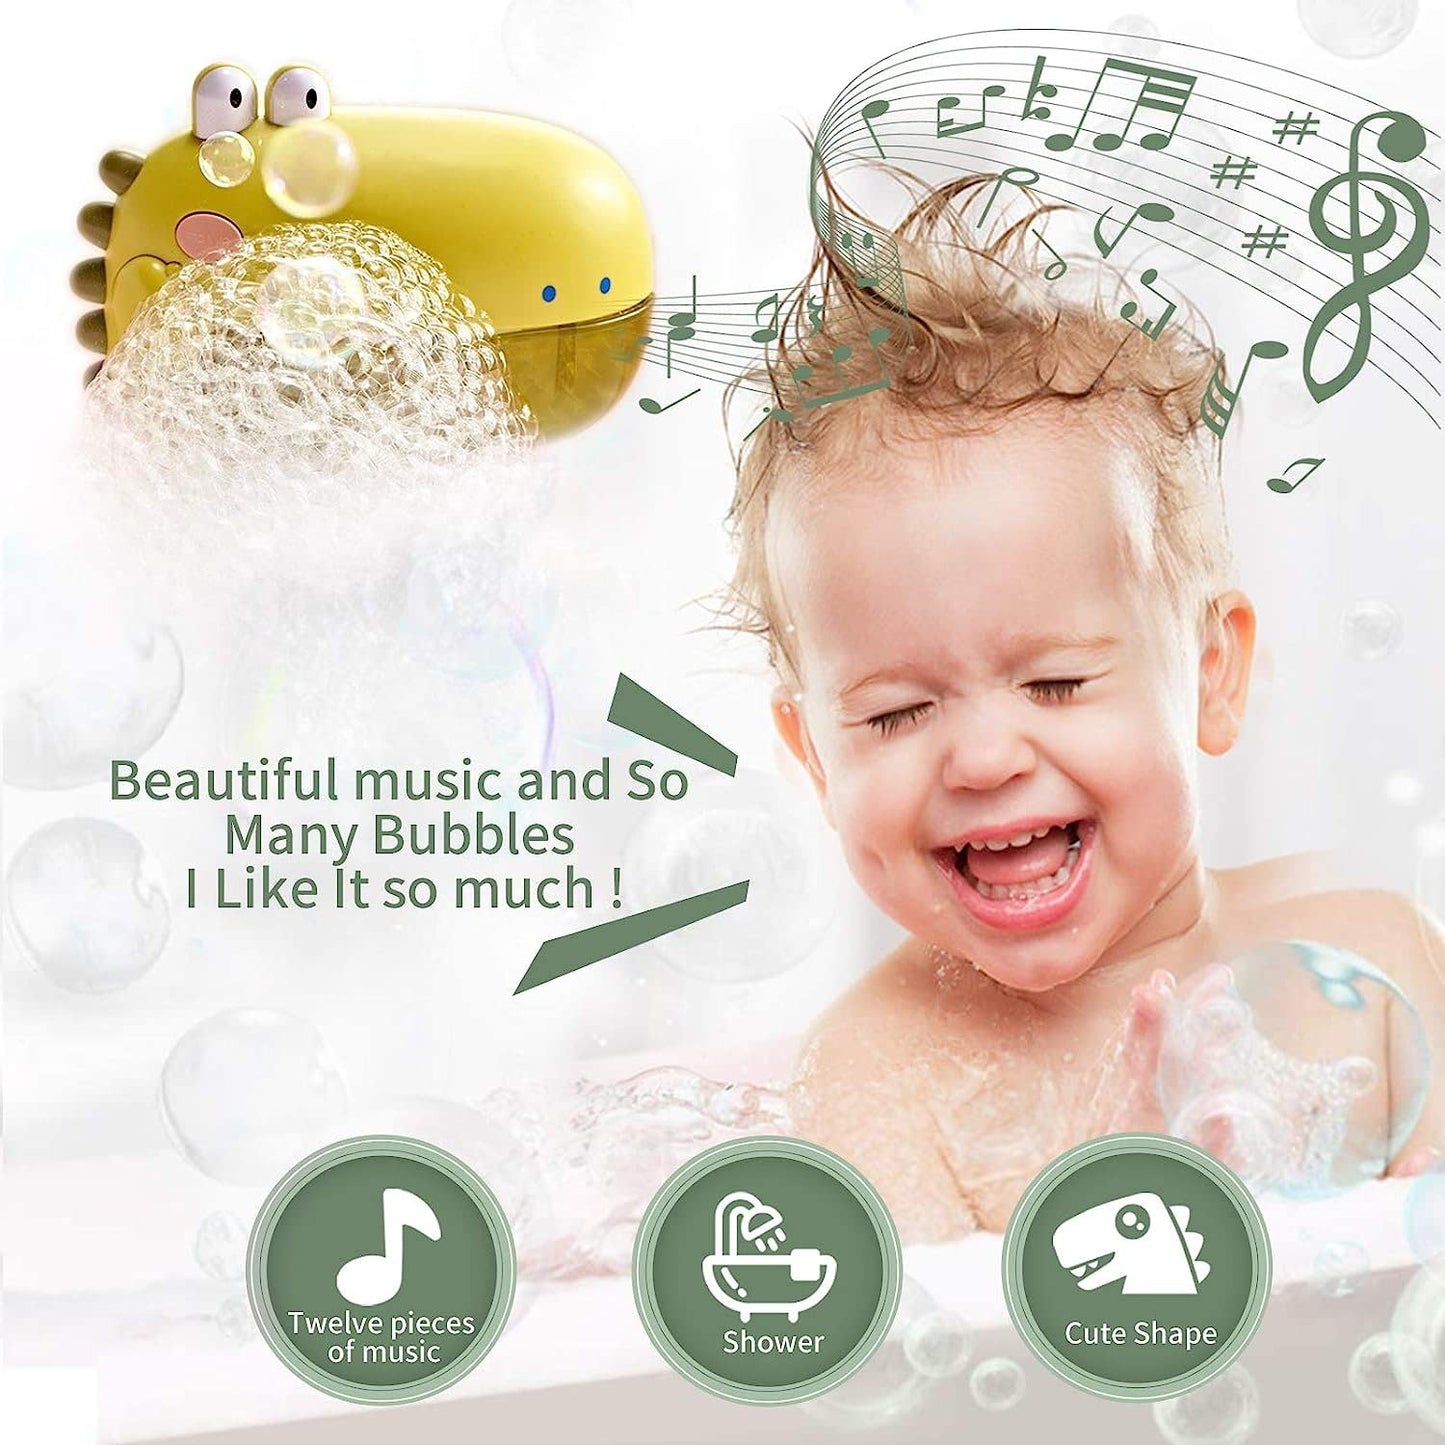 AM ANNA Bubble Bath Toys, Automatic Bubble Maker for Toddlers,Both Music/Silence Mode,Plays 12 Children’s Songs,Baby Bath Toys for The Baby Bathtub,Cute Dinosaur Bathtub Toys for Toddlers(Green)